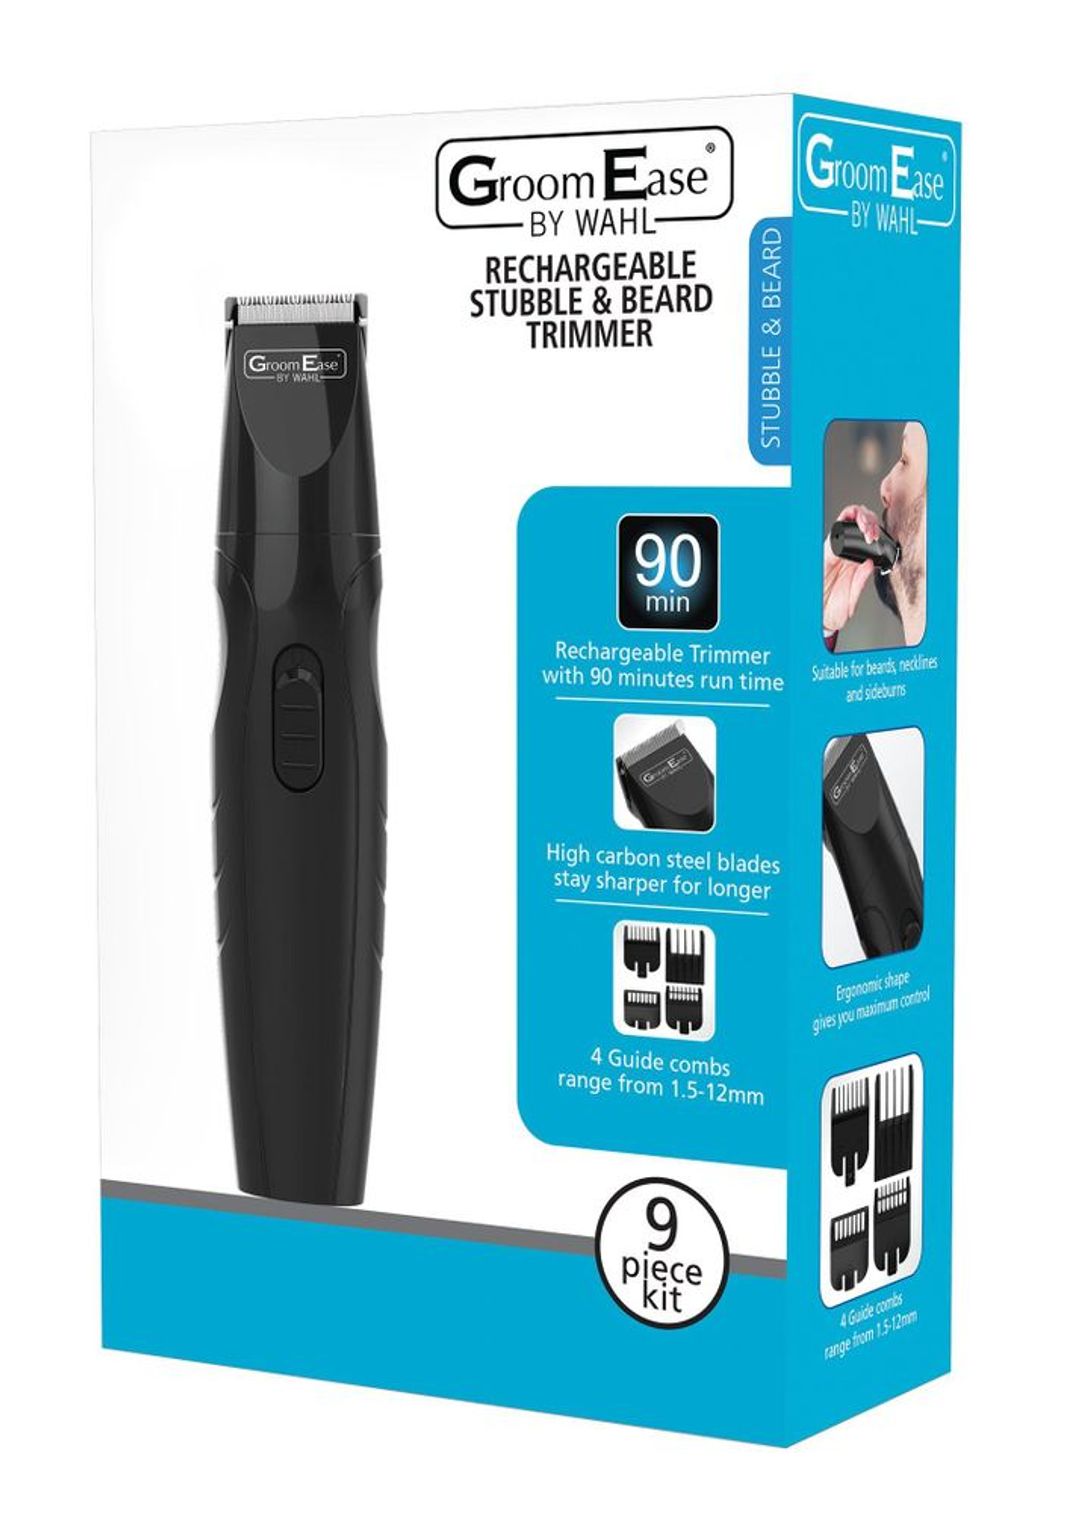 Wahl Groomease Rechargeable Stubble & Beard Trimmer